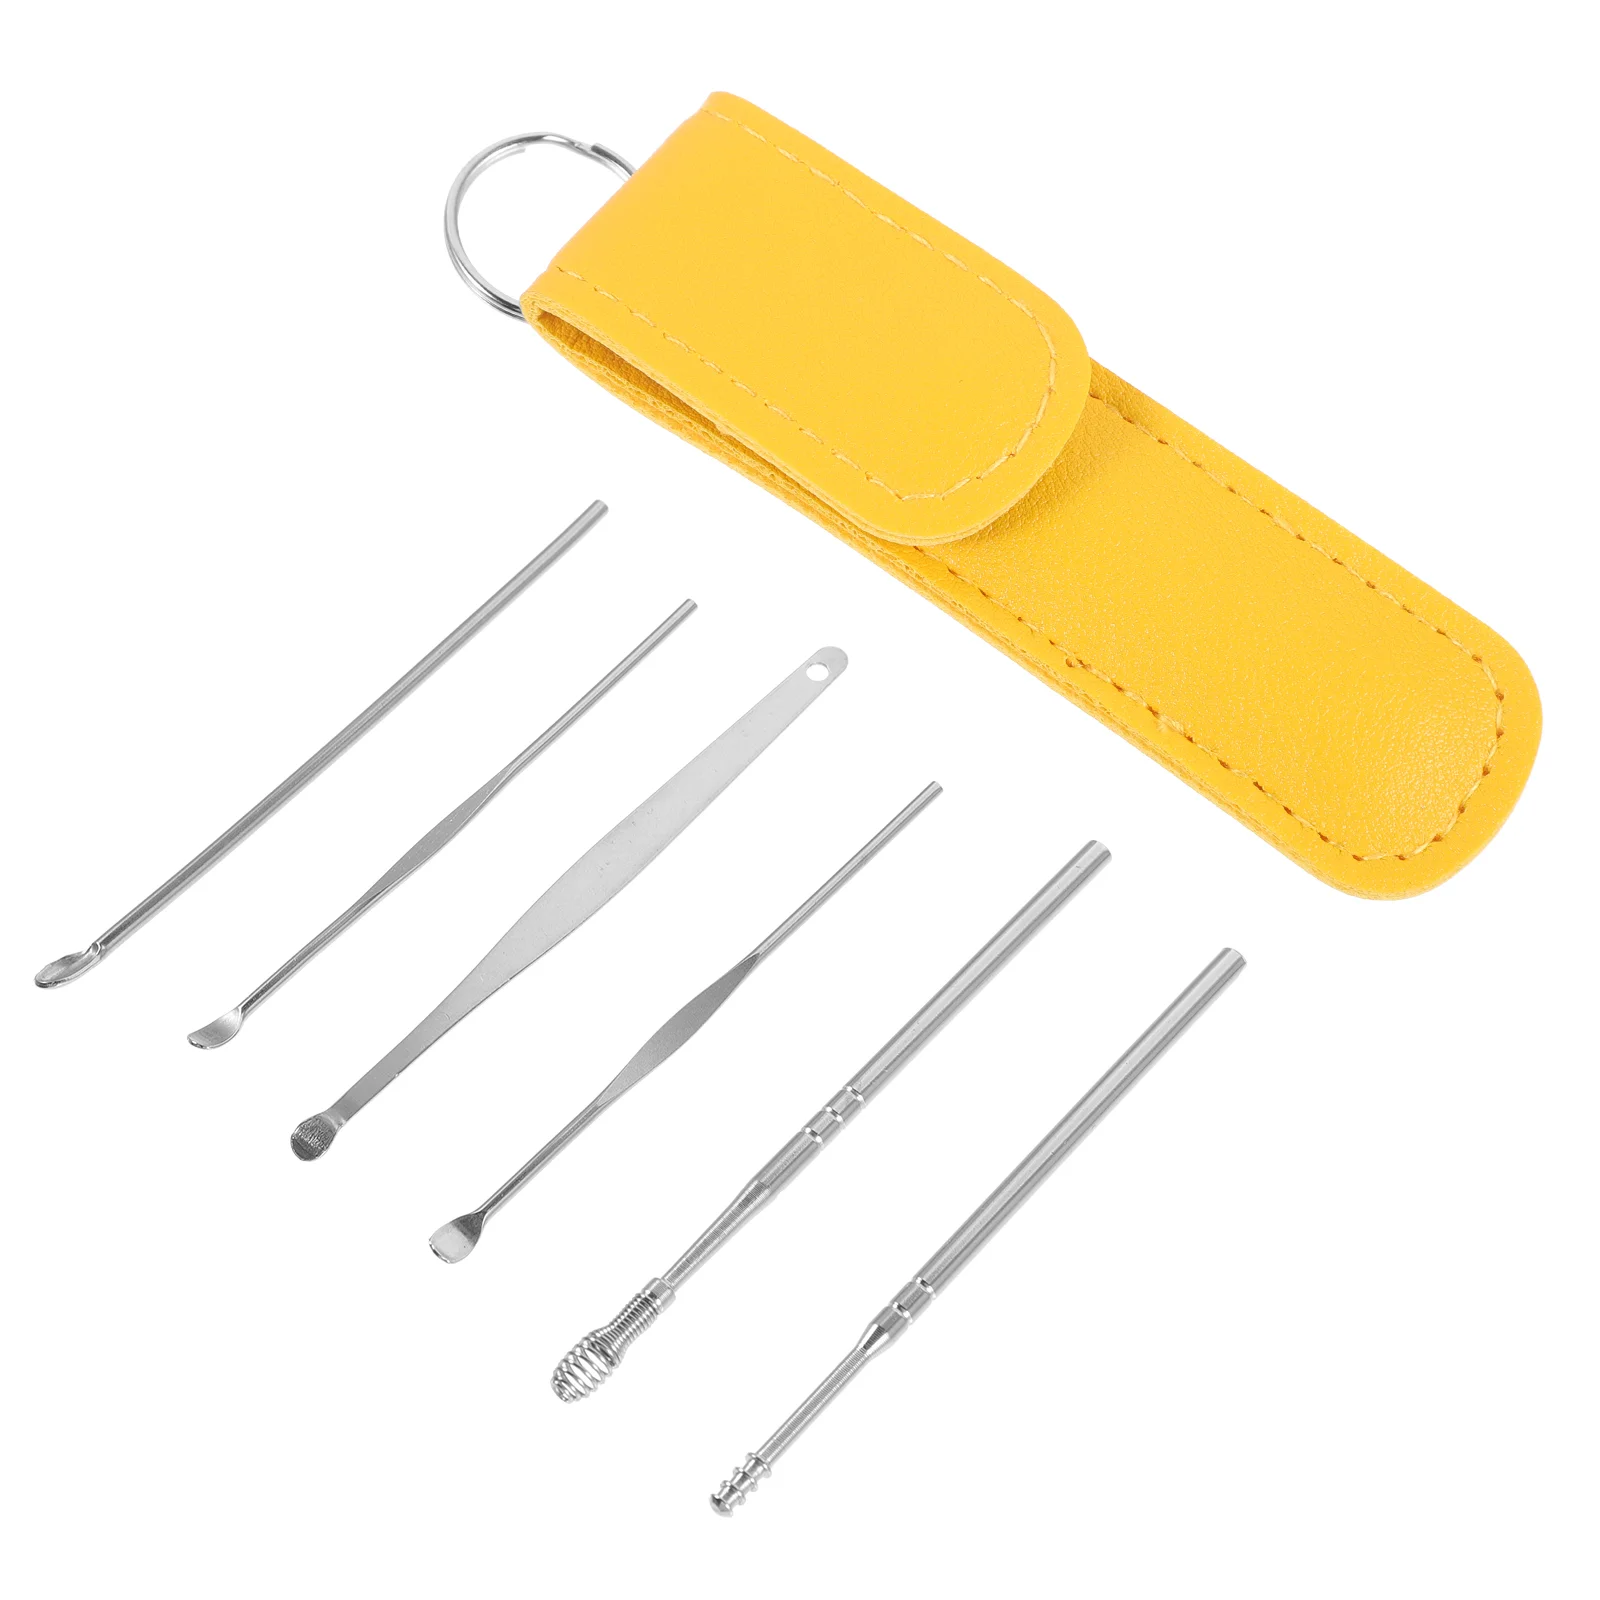 

1 Set of Earwax Remover Tools Portable Earwax Removers Earwax Spoons Earwax Pickers